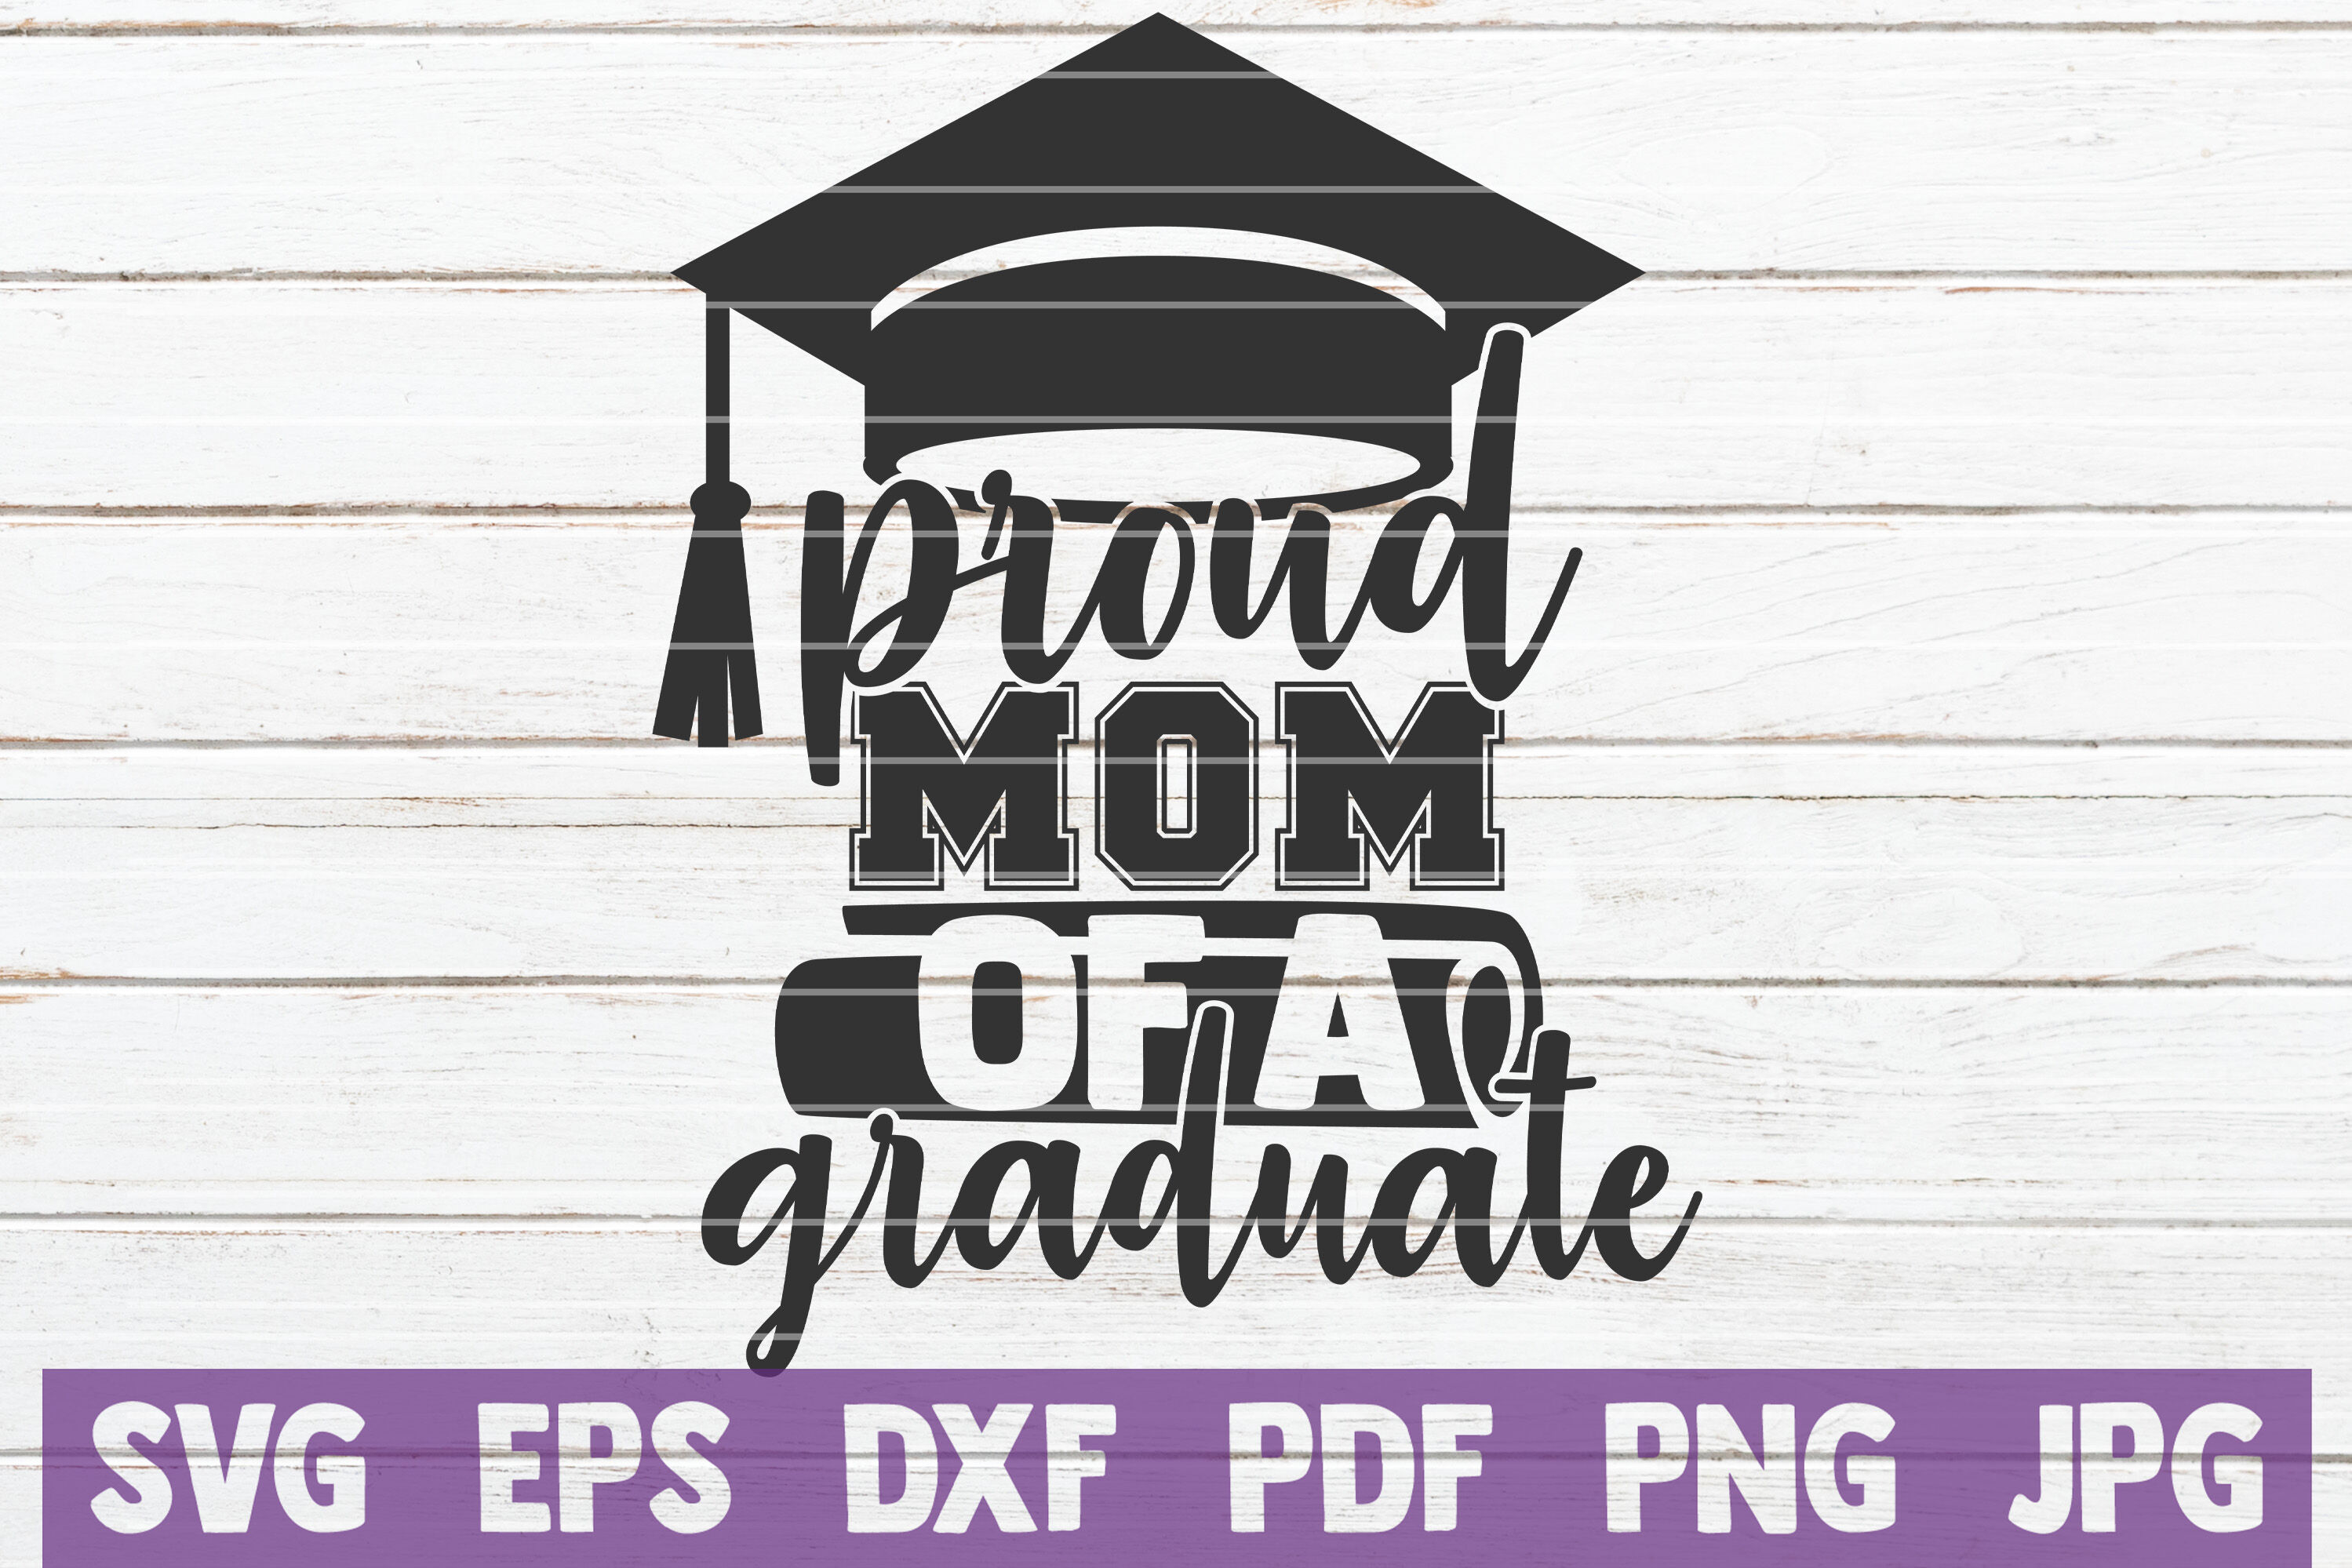 Download Proud Mom Of A Graduate Svg Cut File By Mintymarshmallows Thehungryjpeg Com